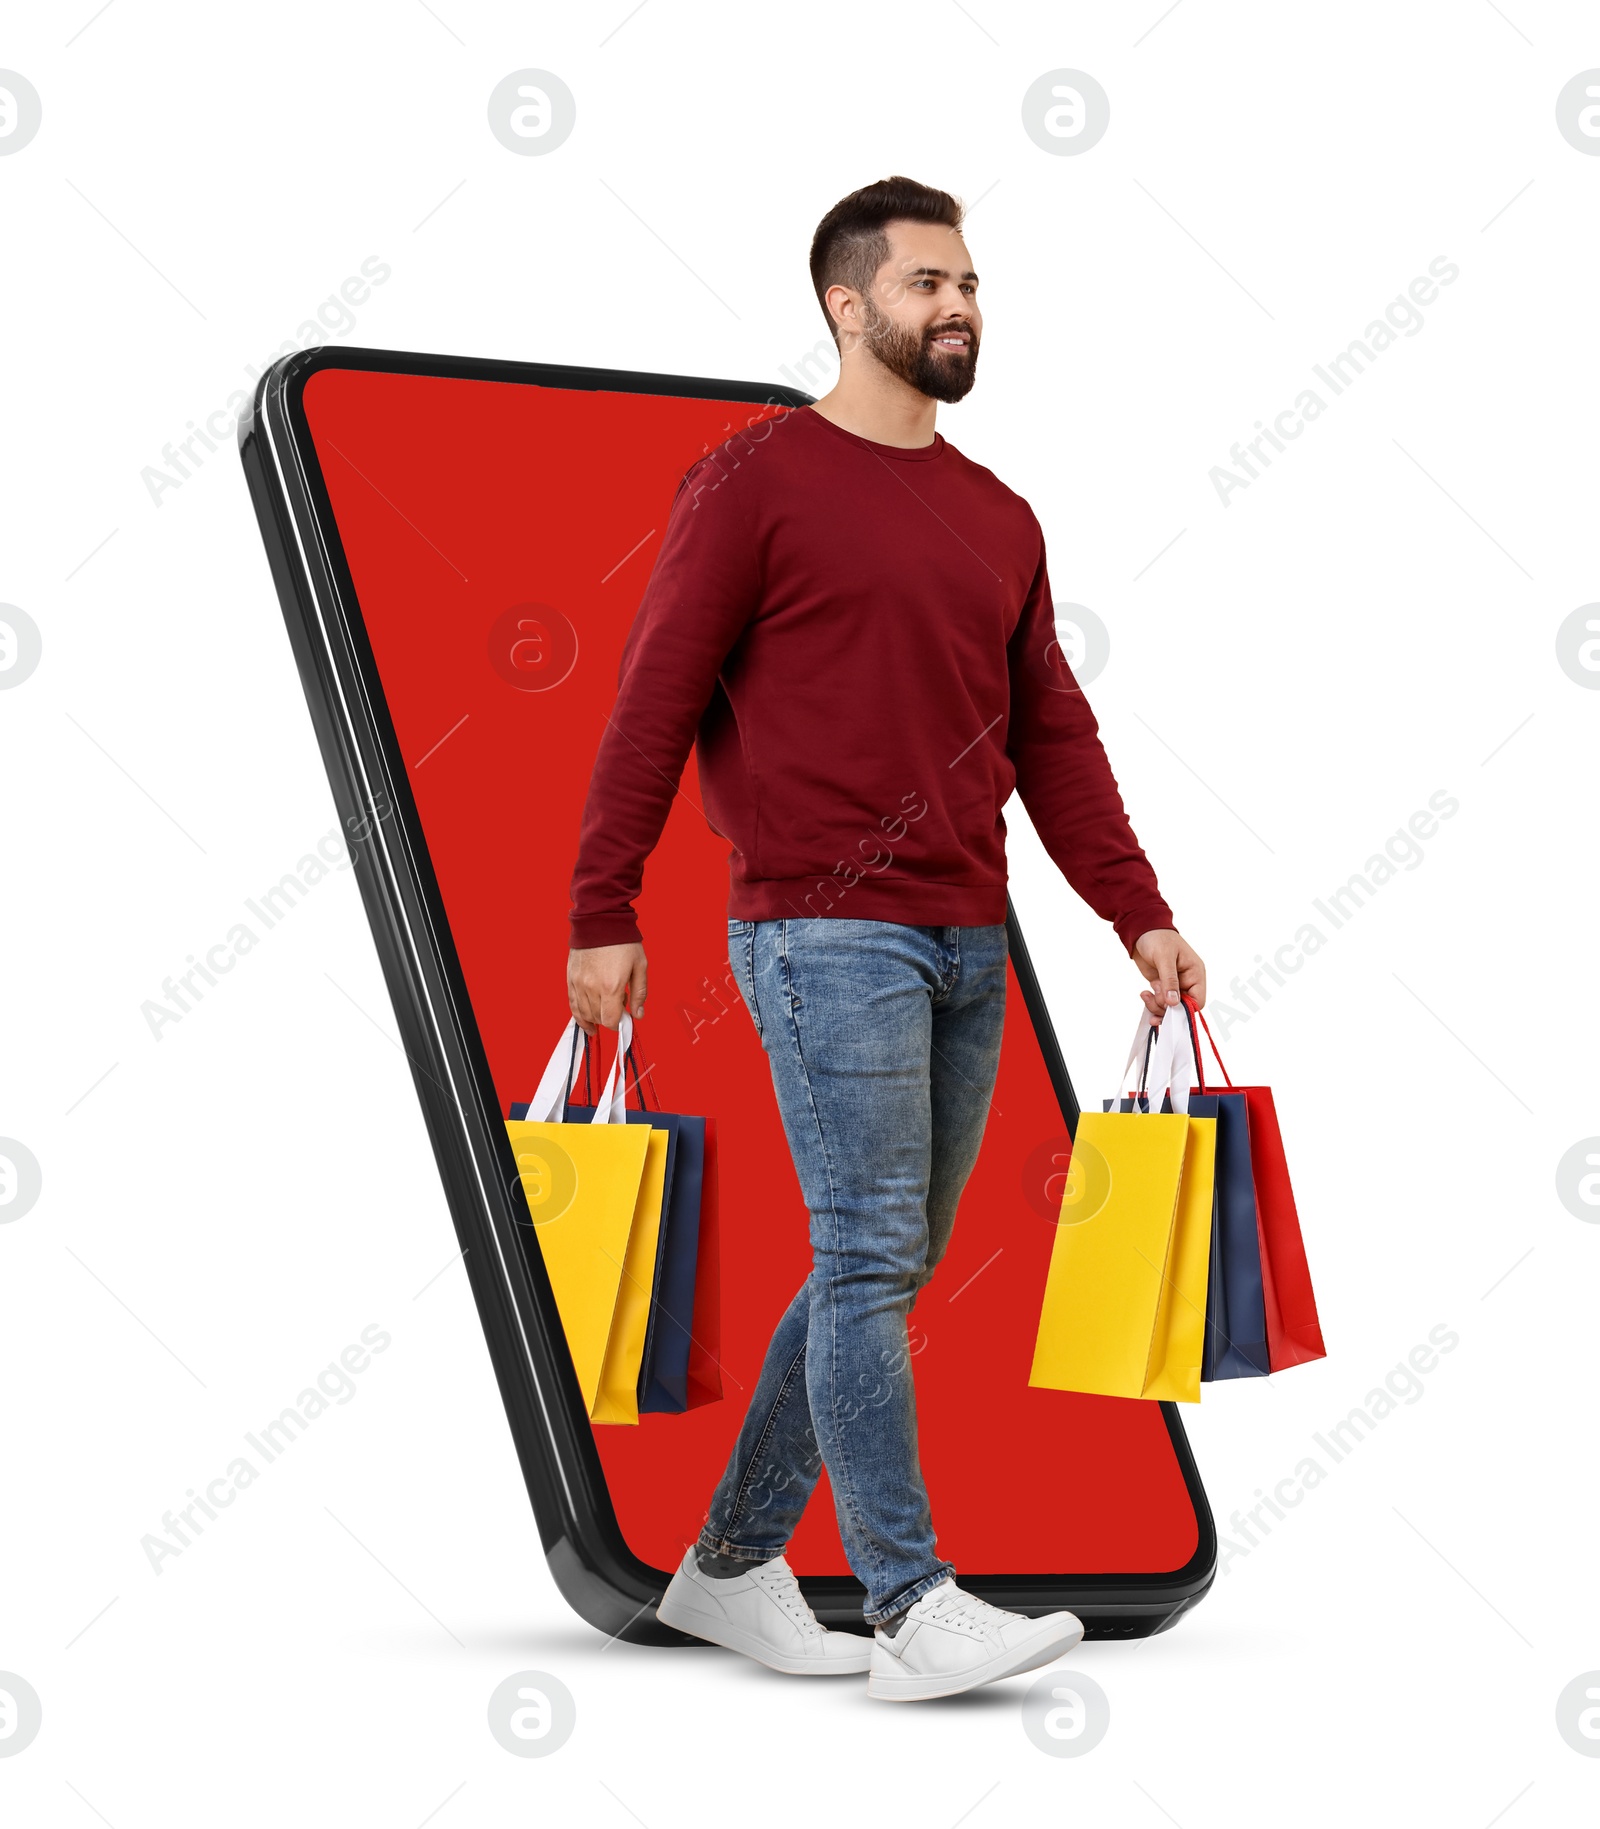 Image of Online shopping. Man with paper bags walking out from smartphone on white background